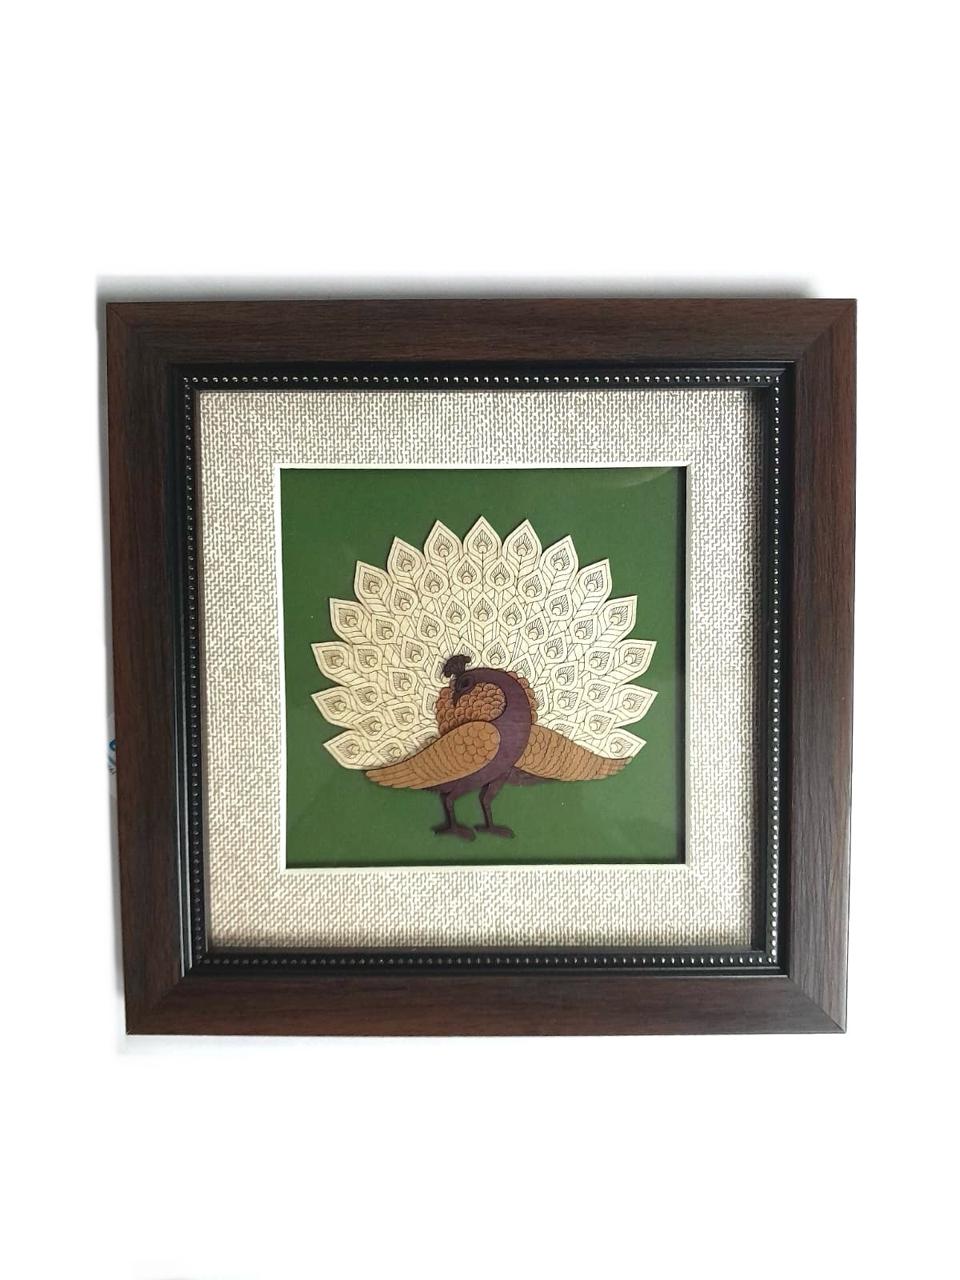 Beautiful Bird Themed Peacock Handpicked Wooden Art Frames Gifts By Tamrapatra